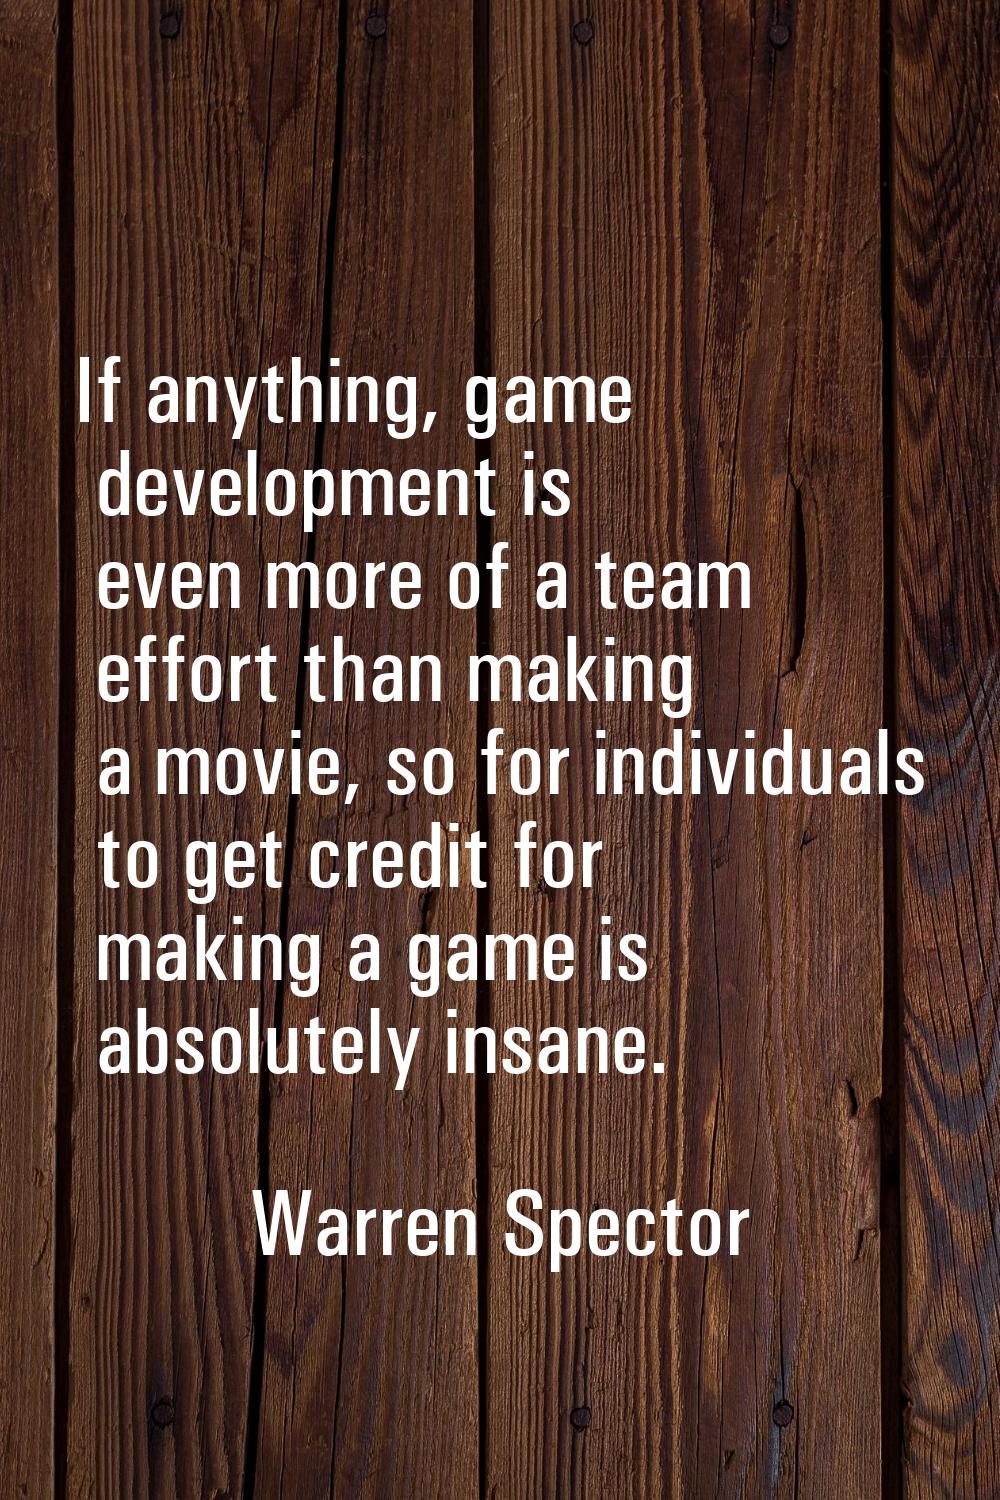 If anything, game development is even more of a team effort than making a movie, so for individuals